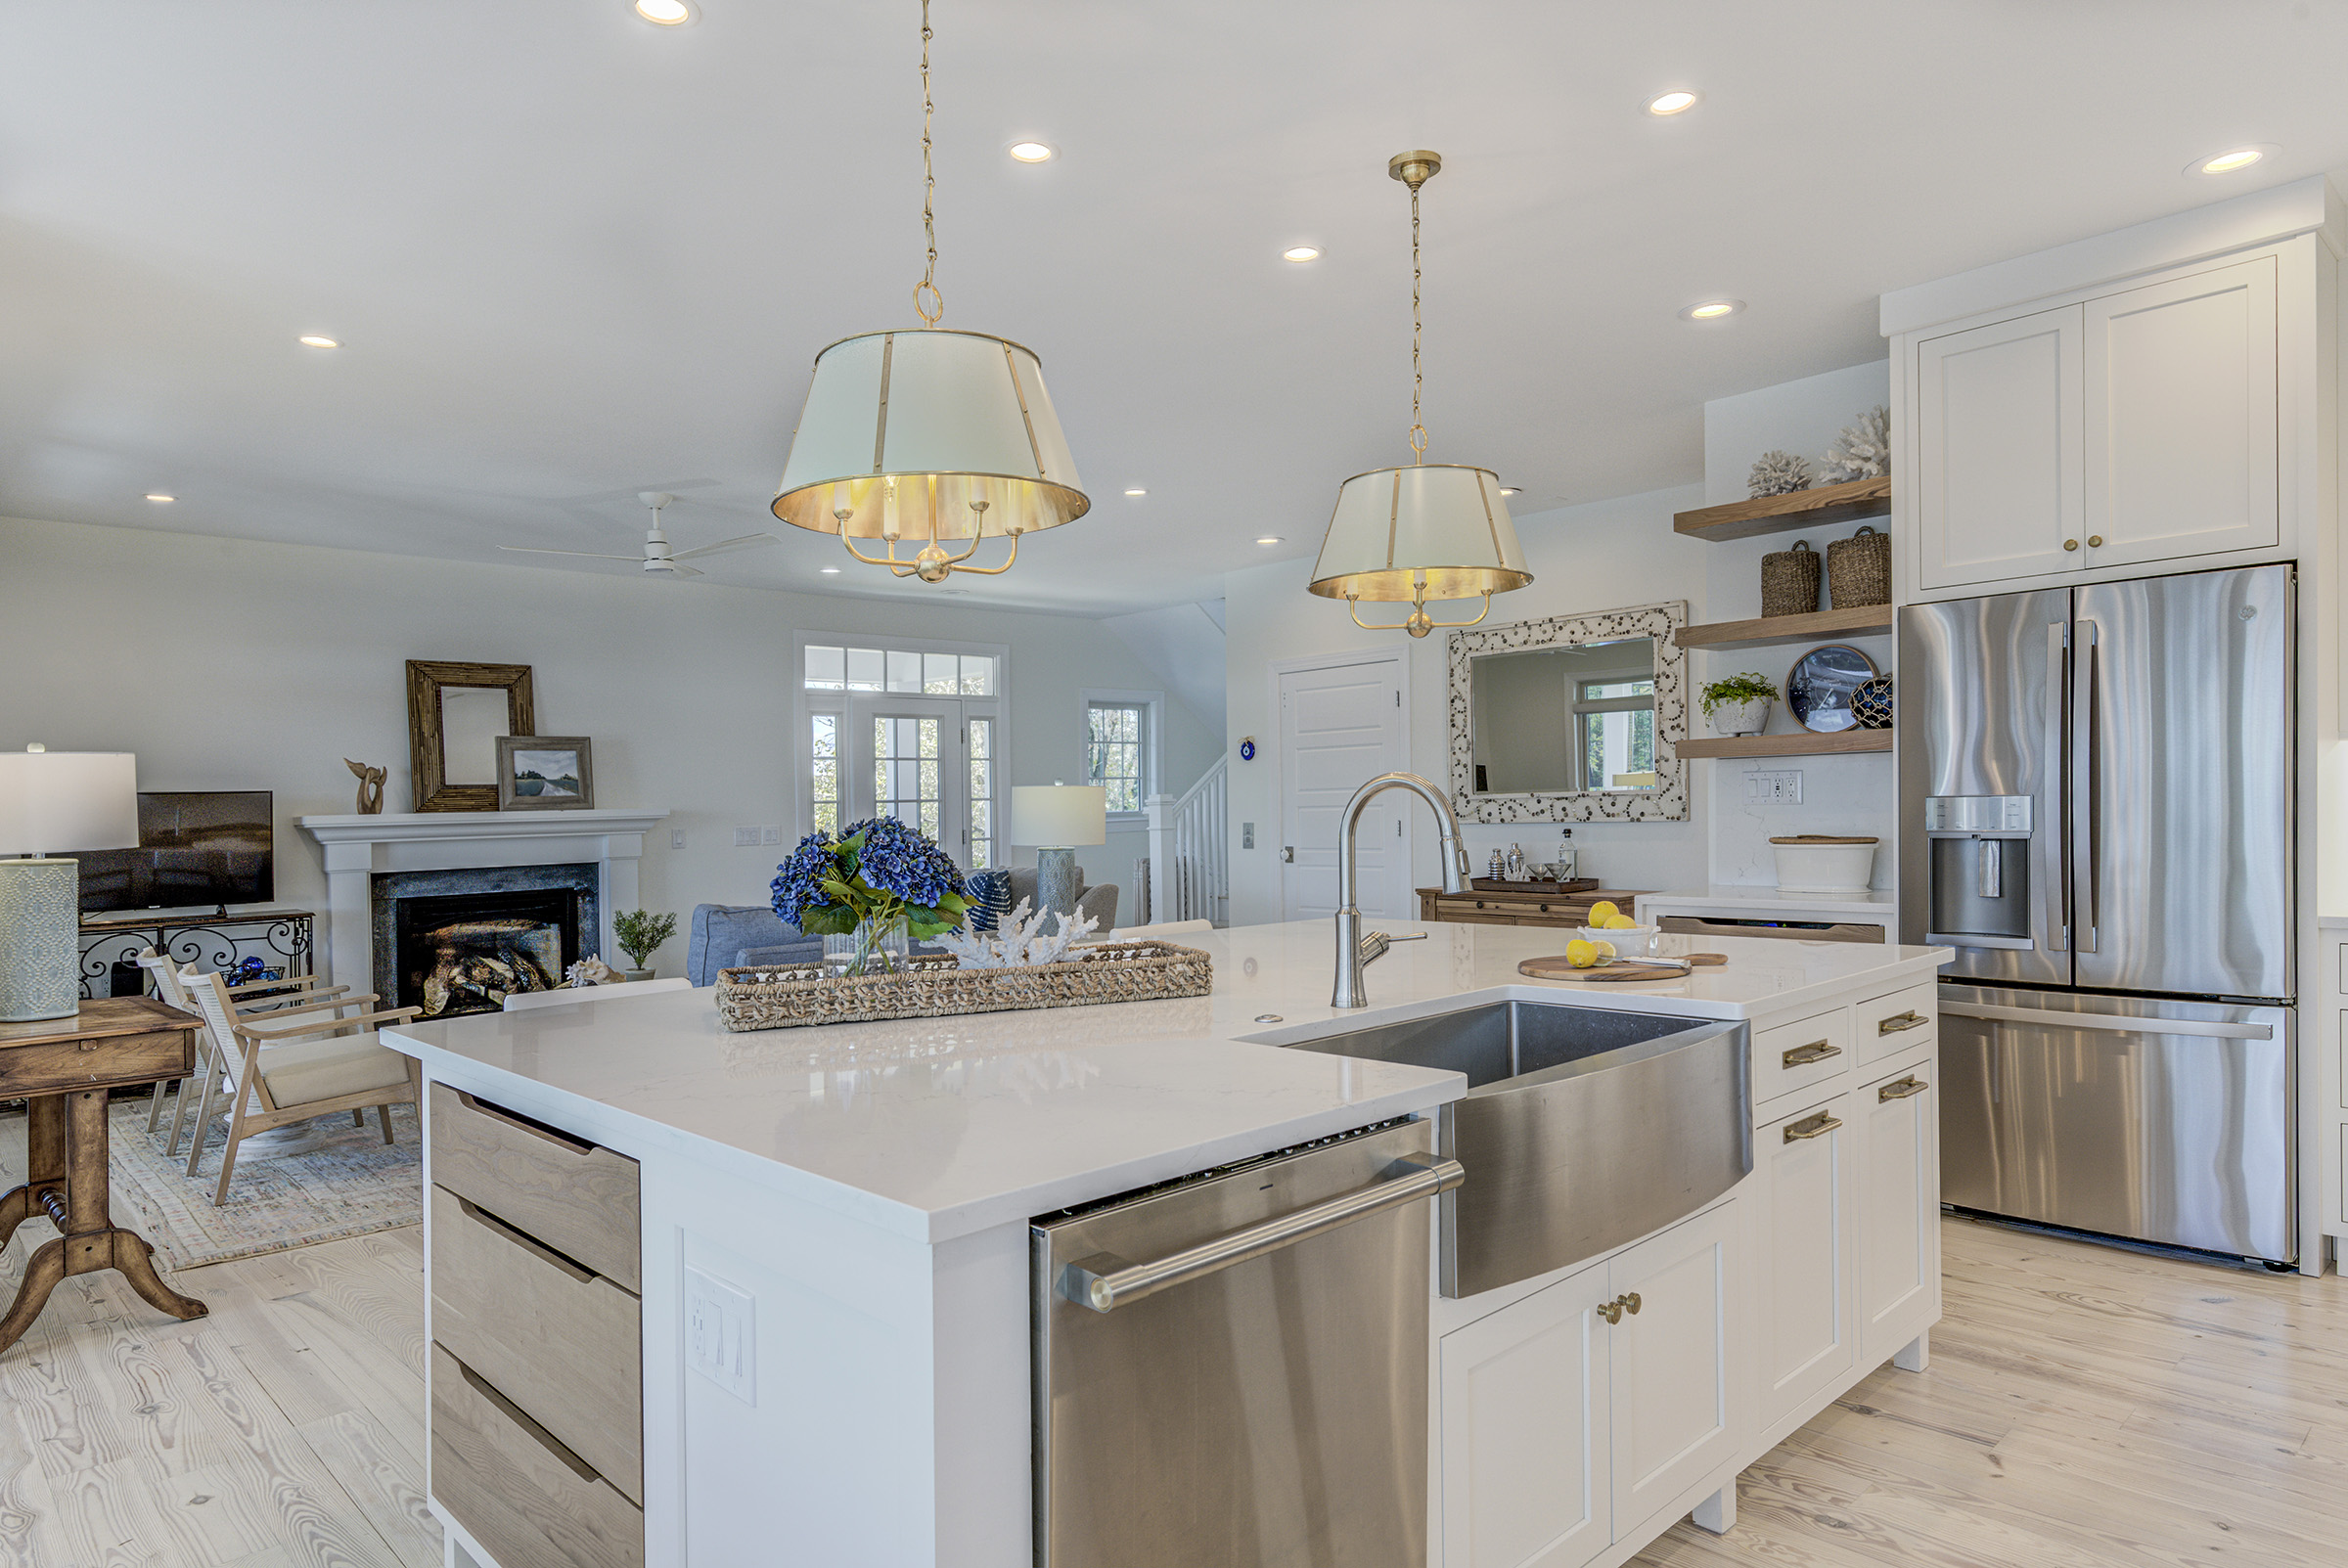 Sea Light Design-Build Pine Road Kitchen Renovation in Selbyville Delaware - ample storage in large island